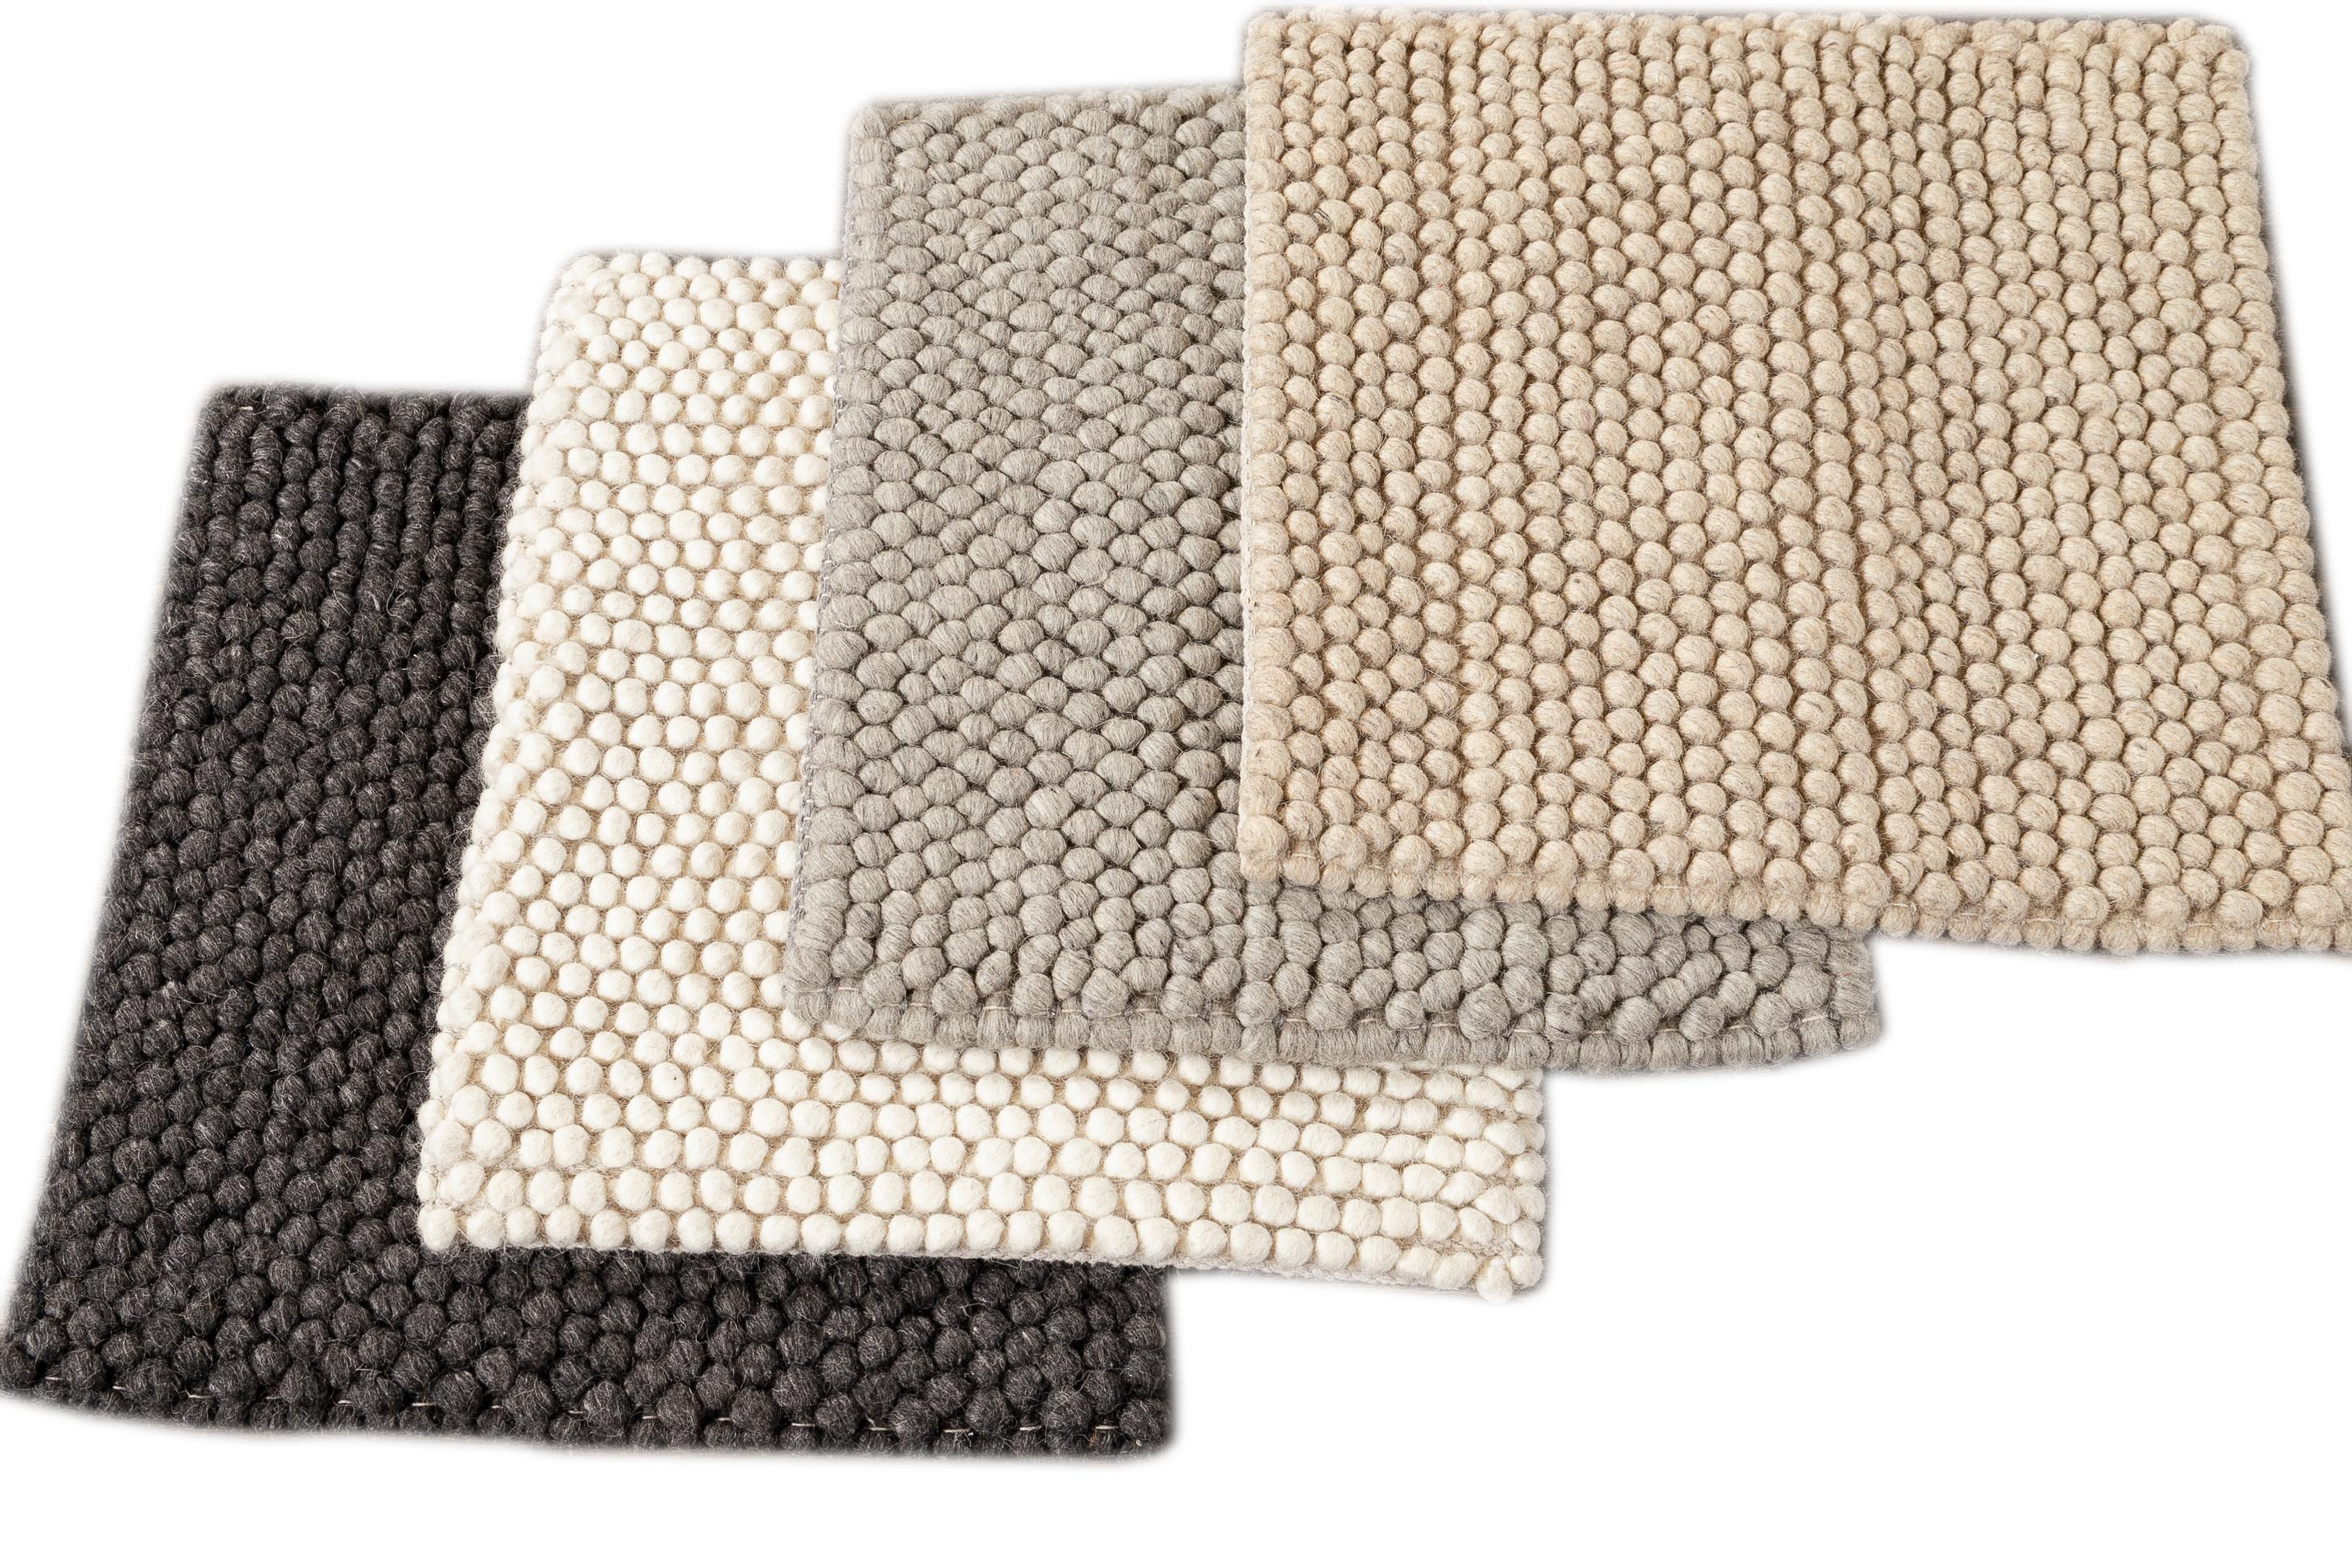 Solid colored textured custom rug. Custom sizes and colors made-to-order.

Material: 100% wool
Lead time: Approximate 12 weeks
Available colors: Charcoal, Ivory, Grey, Beige
 